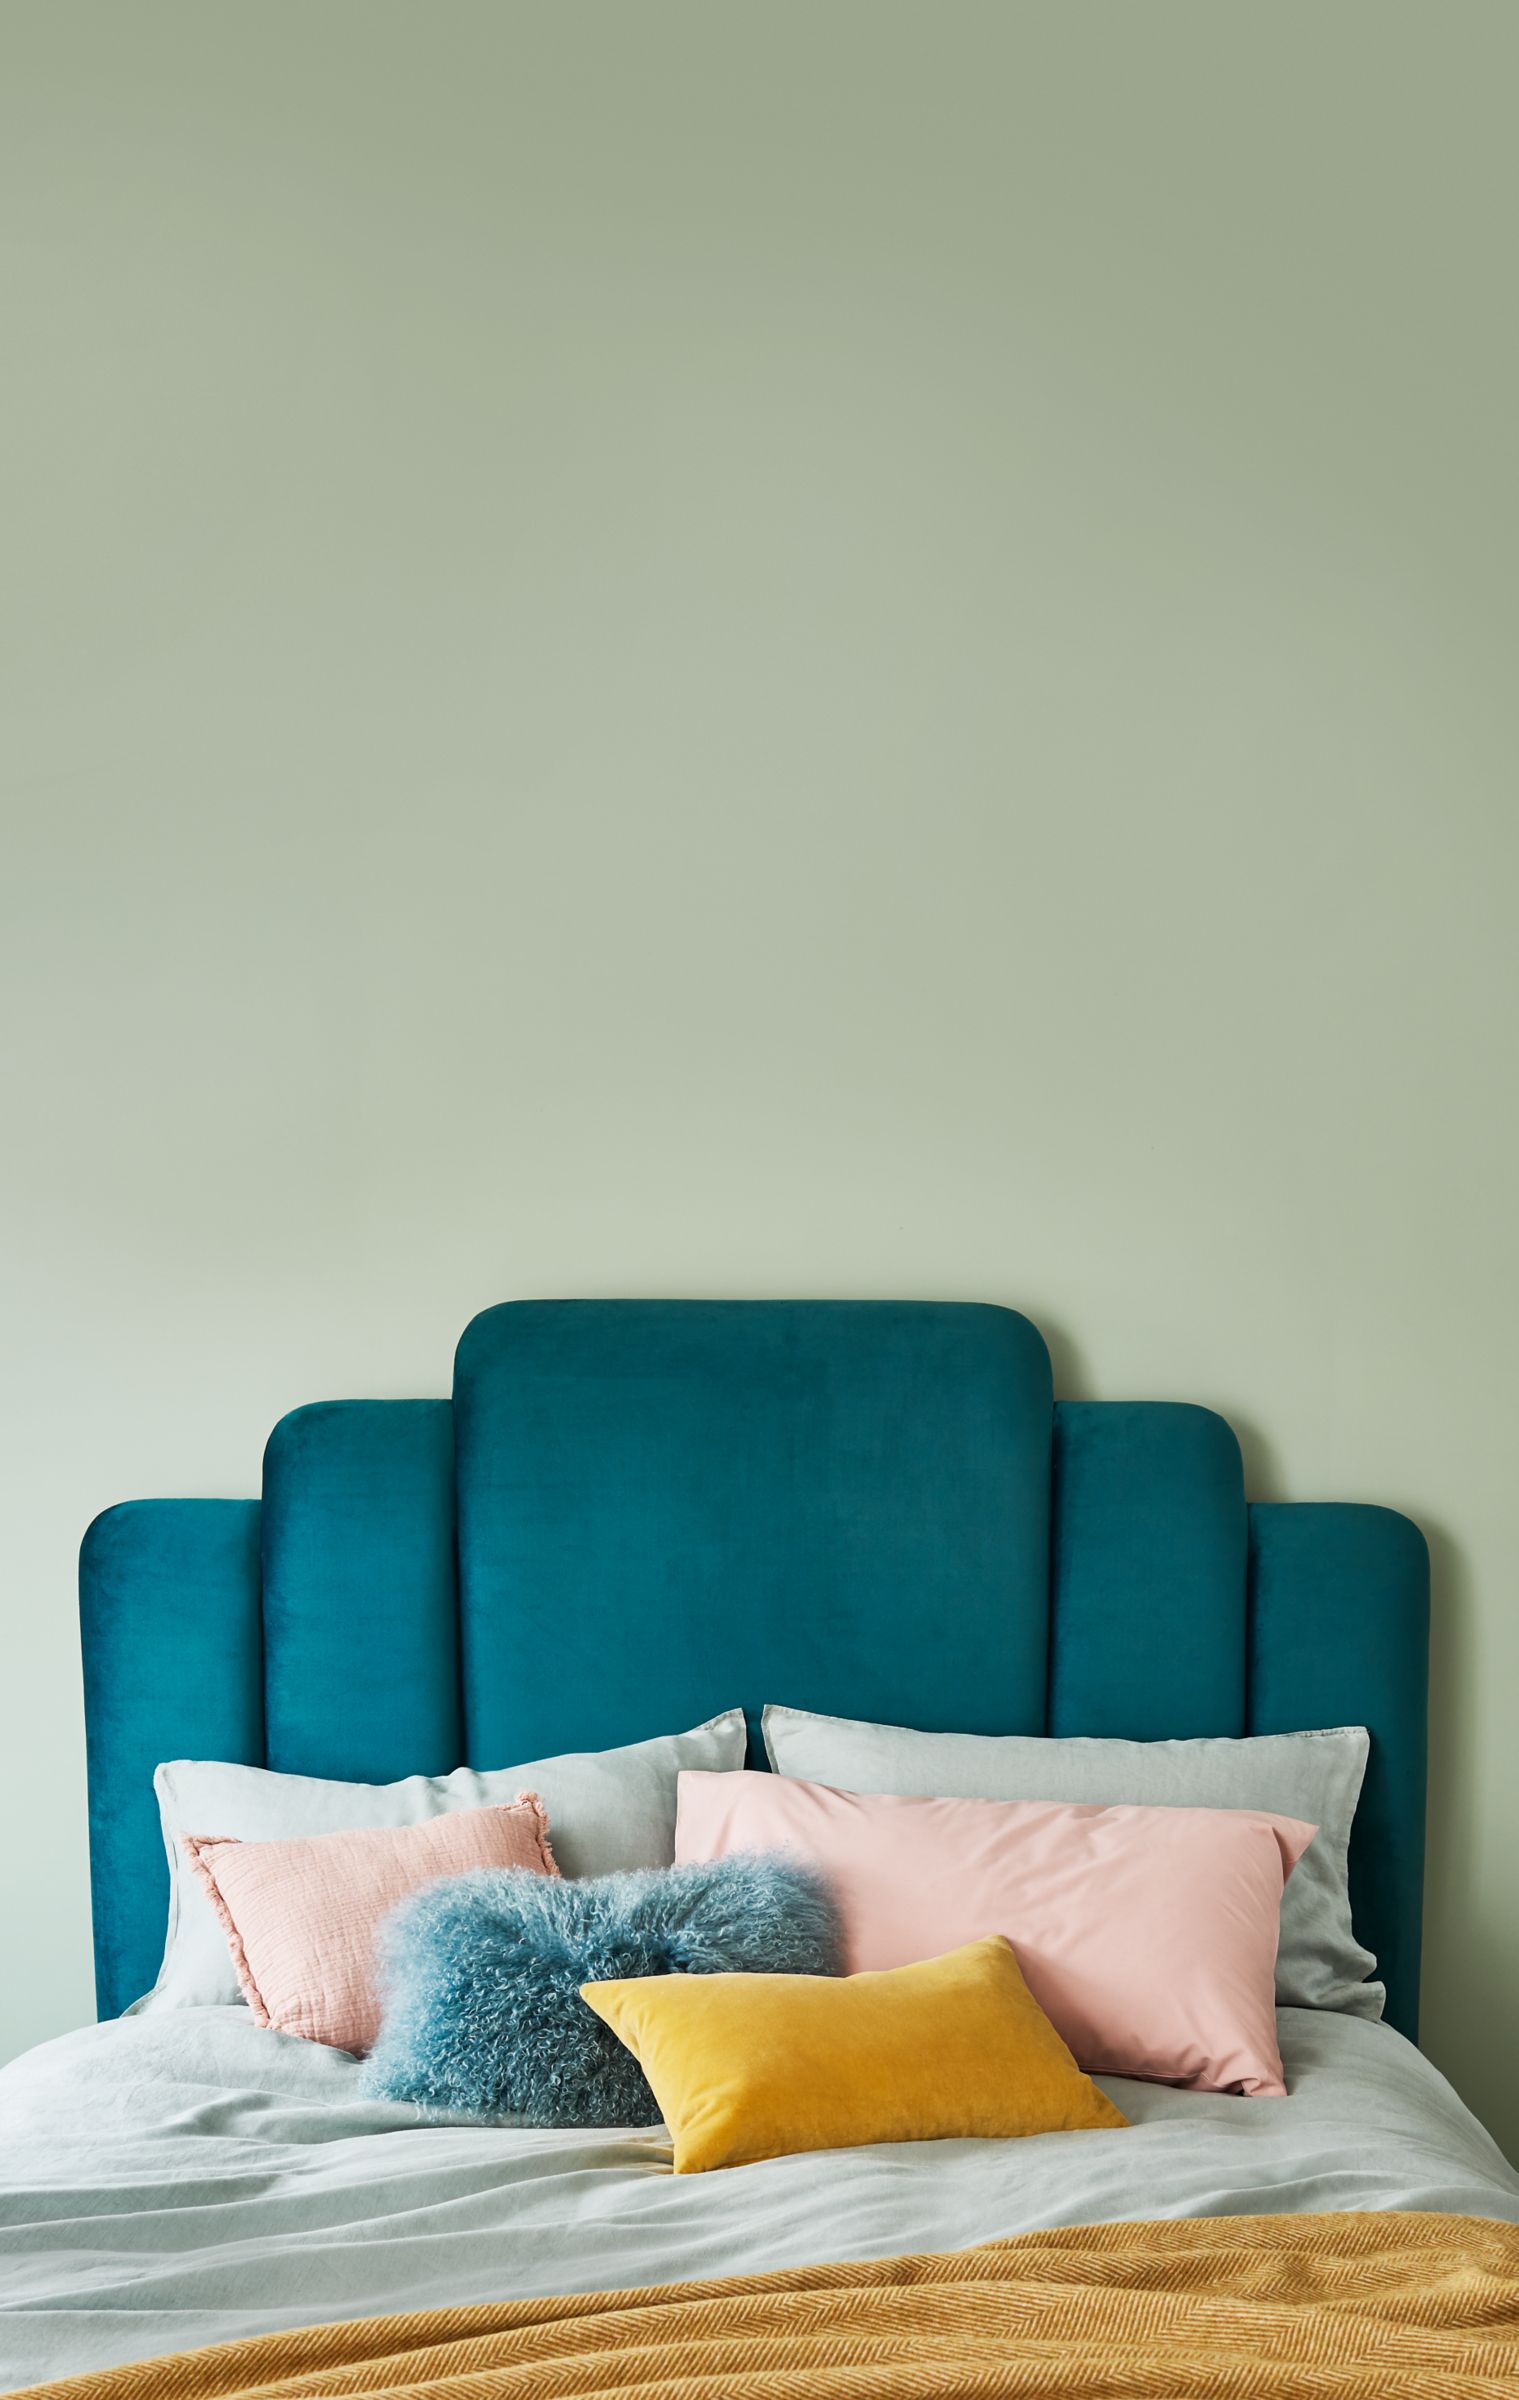 Bold coloured bed